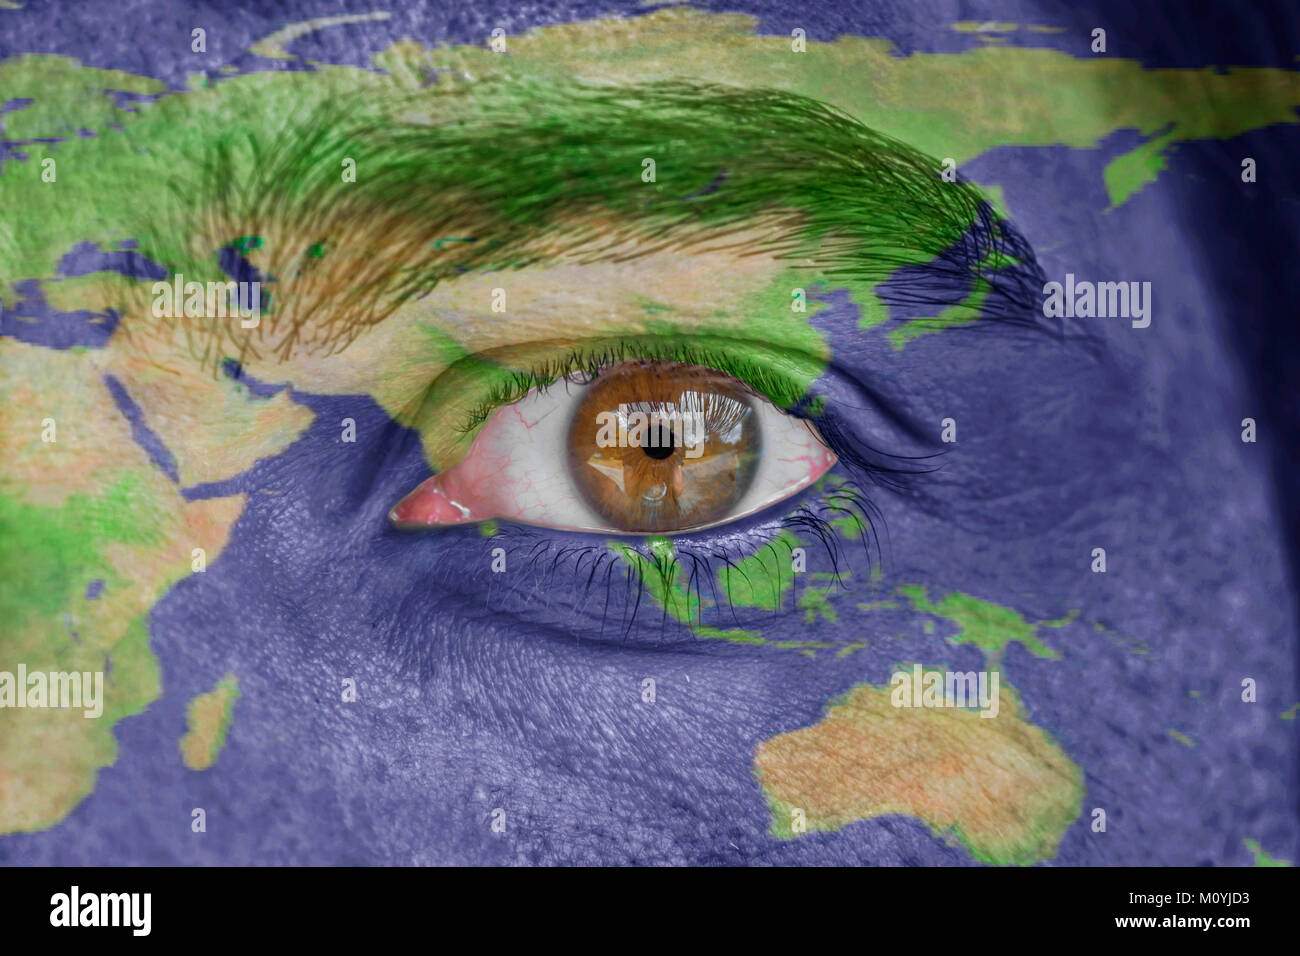 Human face and eye painted with Asia space geography map Stock Photo